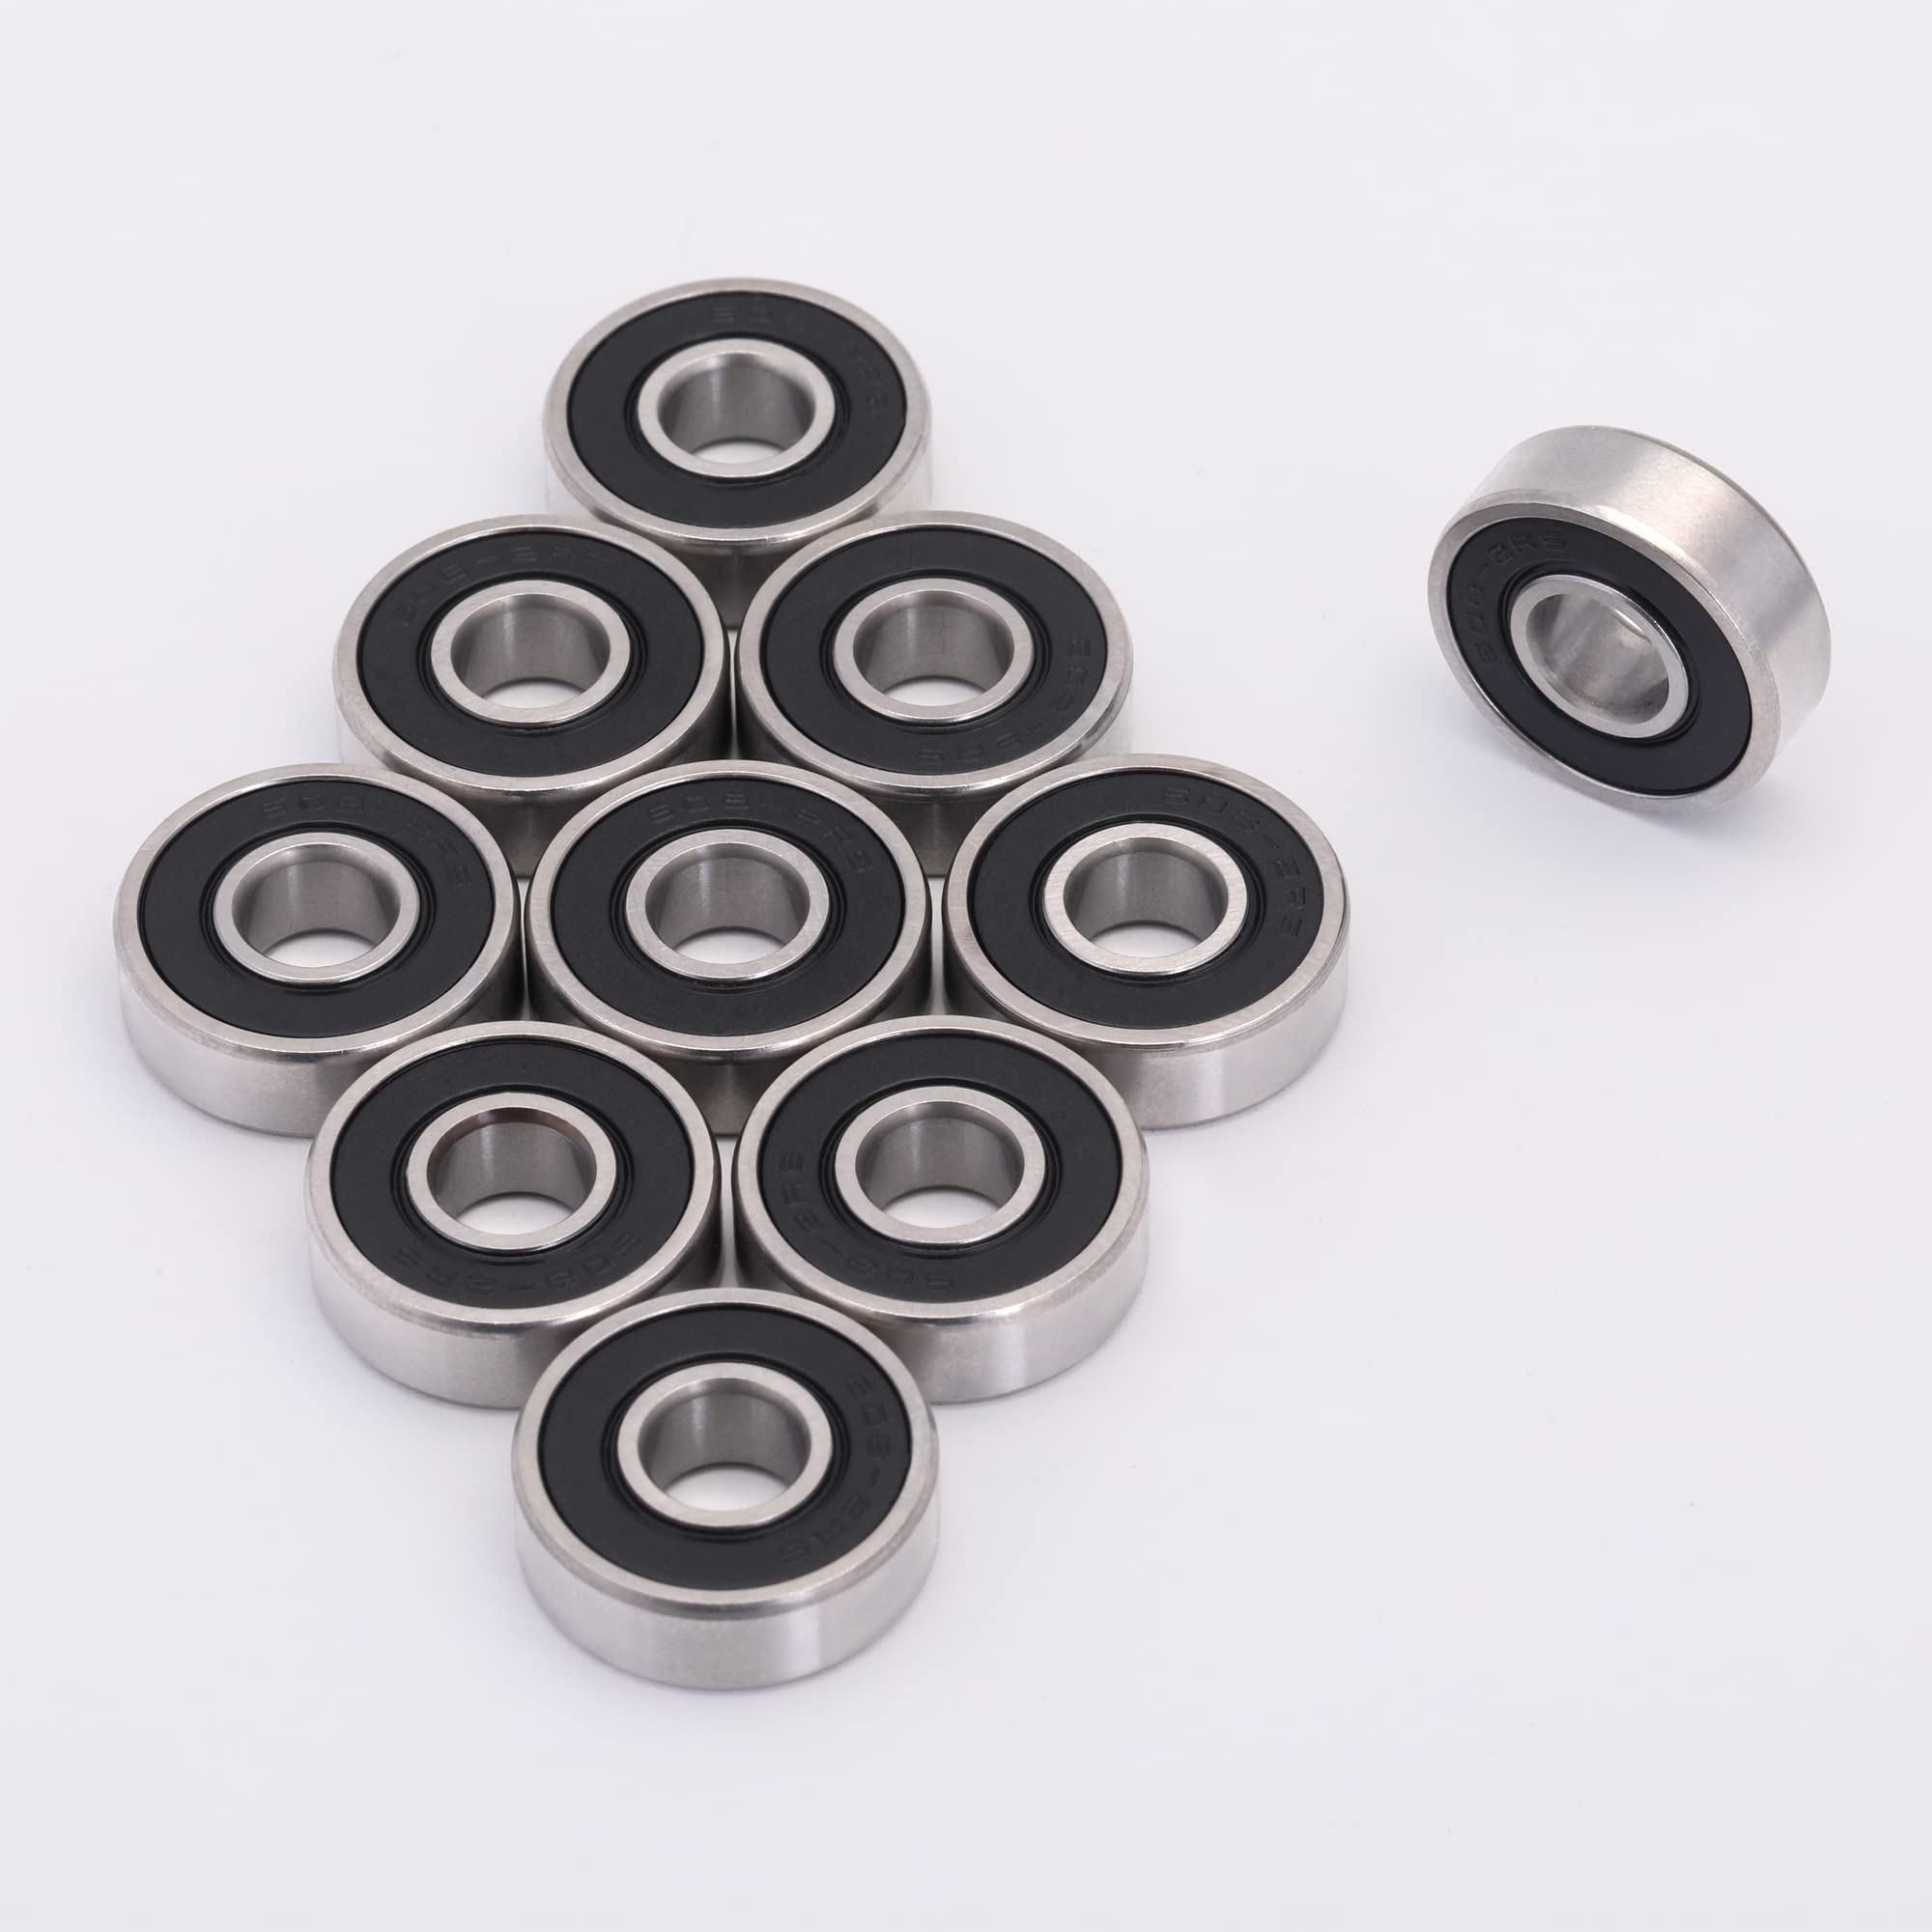 Xike 10 Pcs 608-2Rs Bearings 8X22X7Mm, Double Rubber Seals And Pre-Iubrication, Deep Groove Ball Bearings.